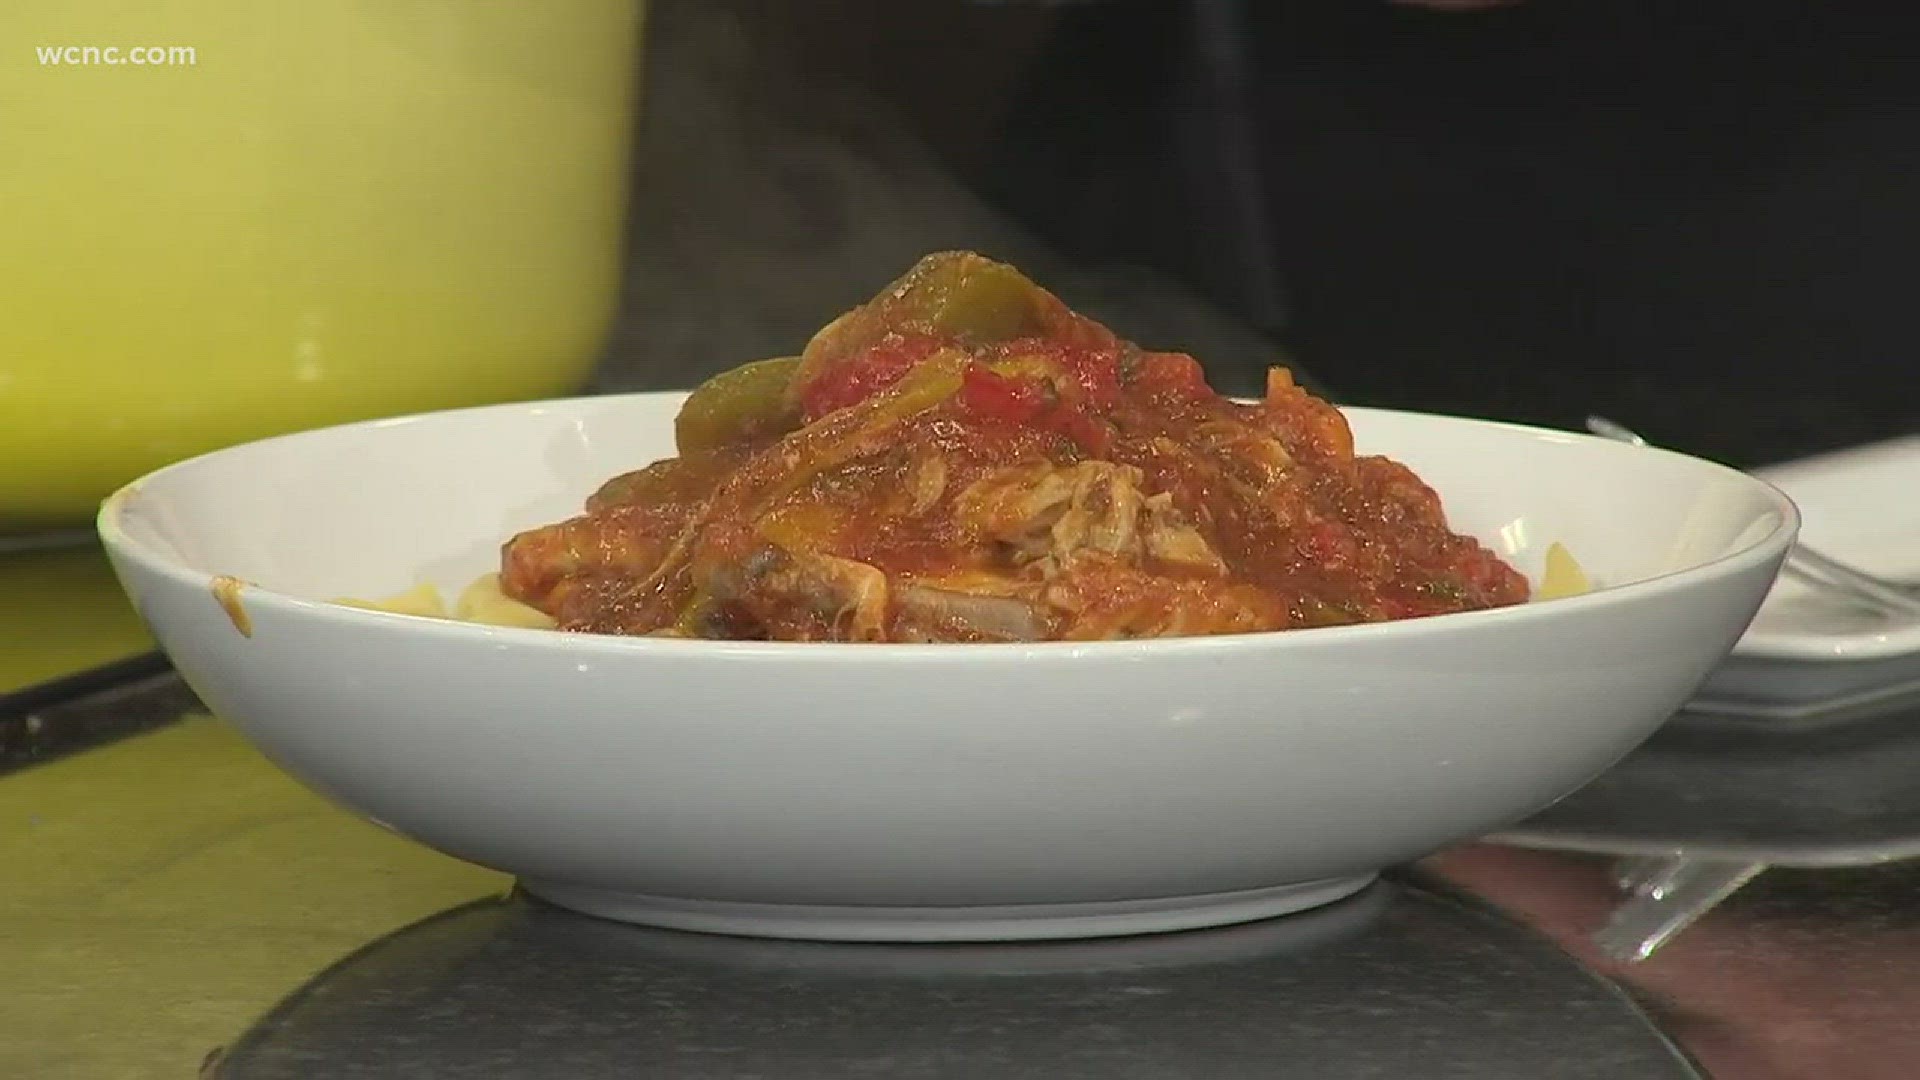 Melanie Tritten and Andy Tritten are making some Italian comfort food. Check out this delicious recipe.